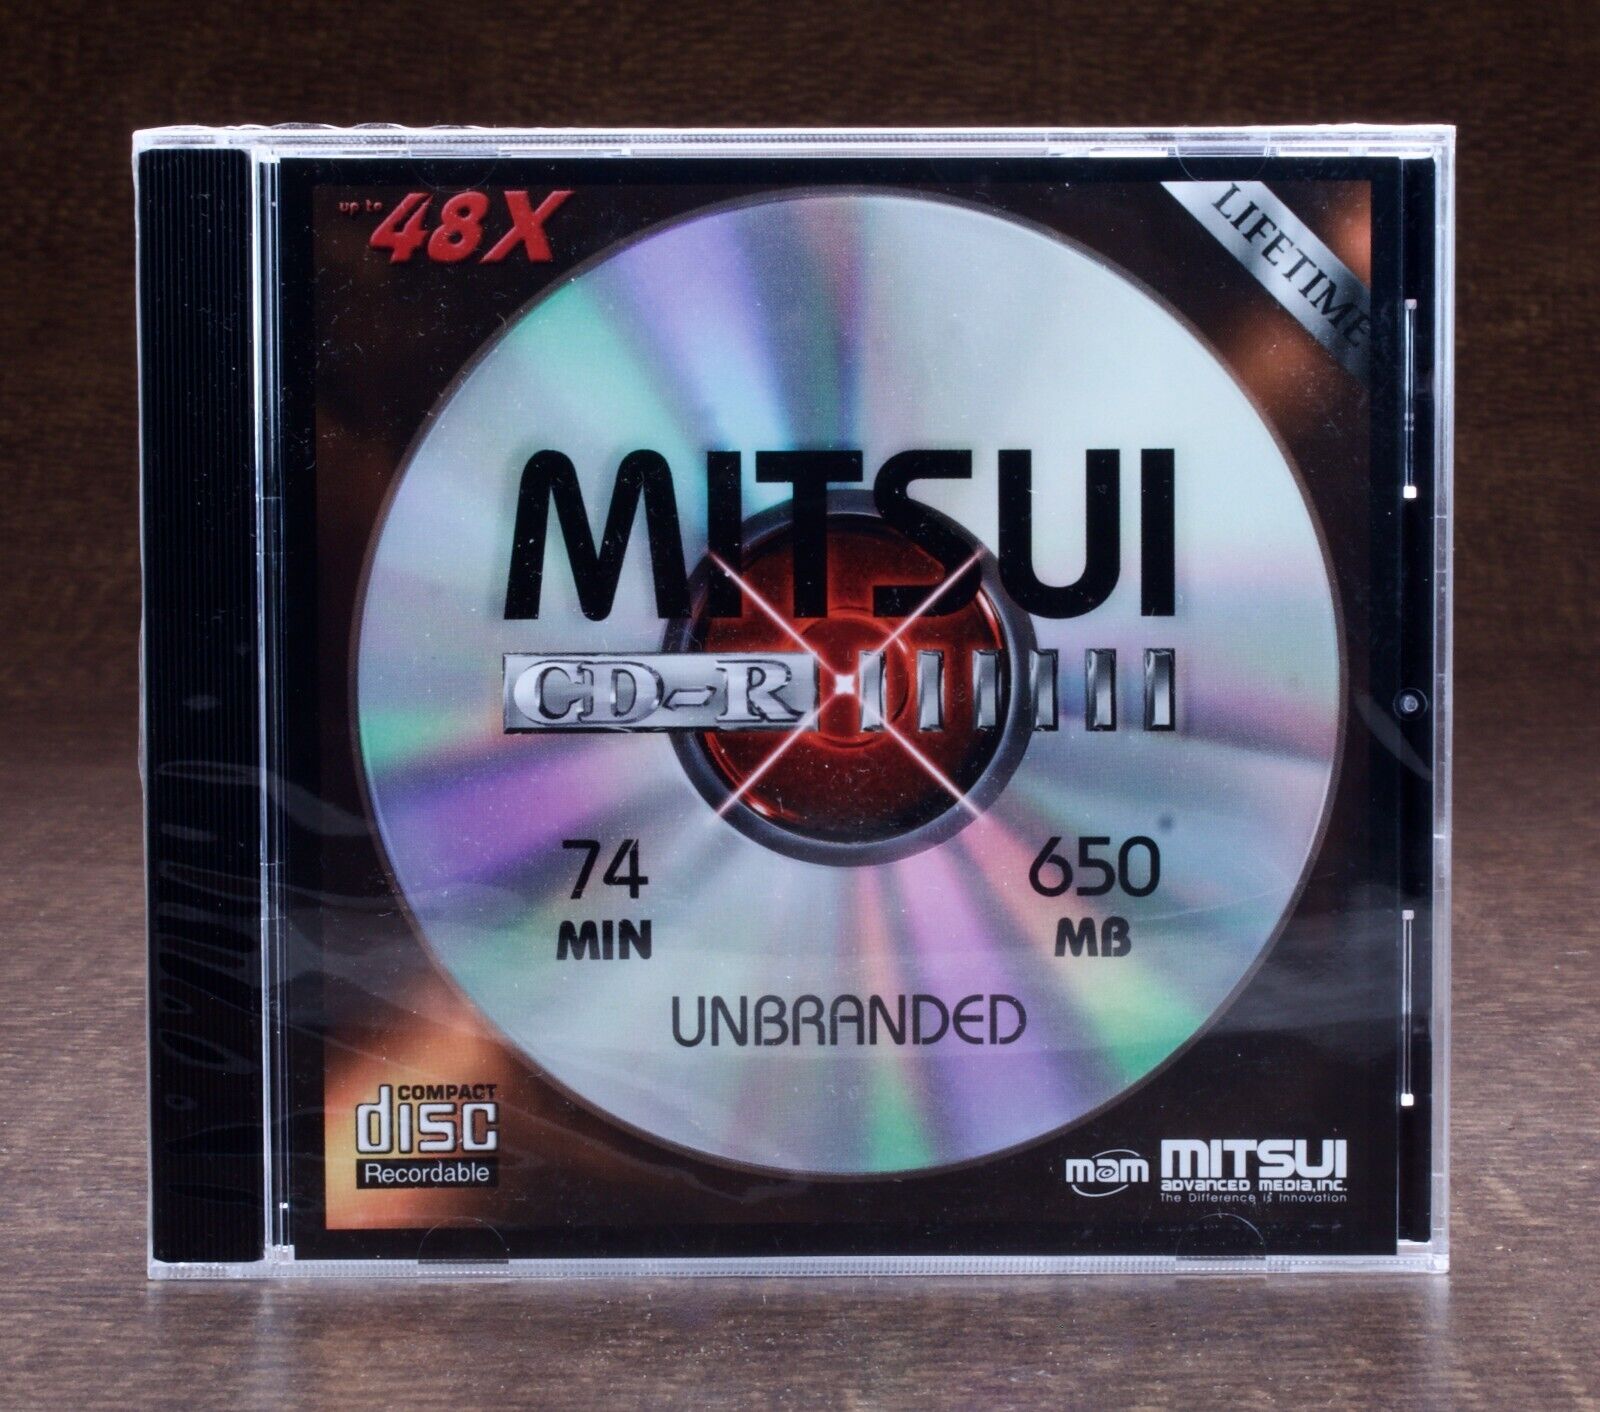 Mitsui CD-R 74 Min 650 MB Thermal Discs Unbranded 48X